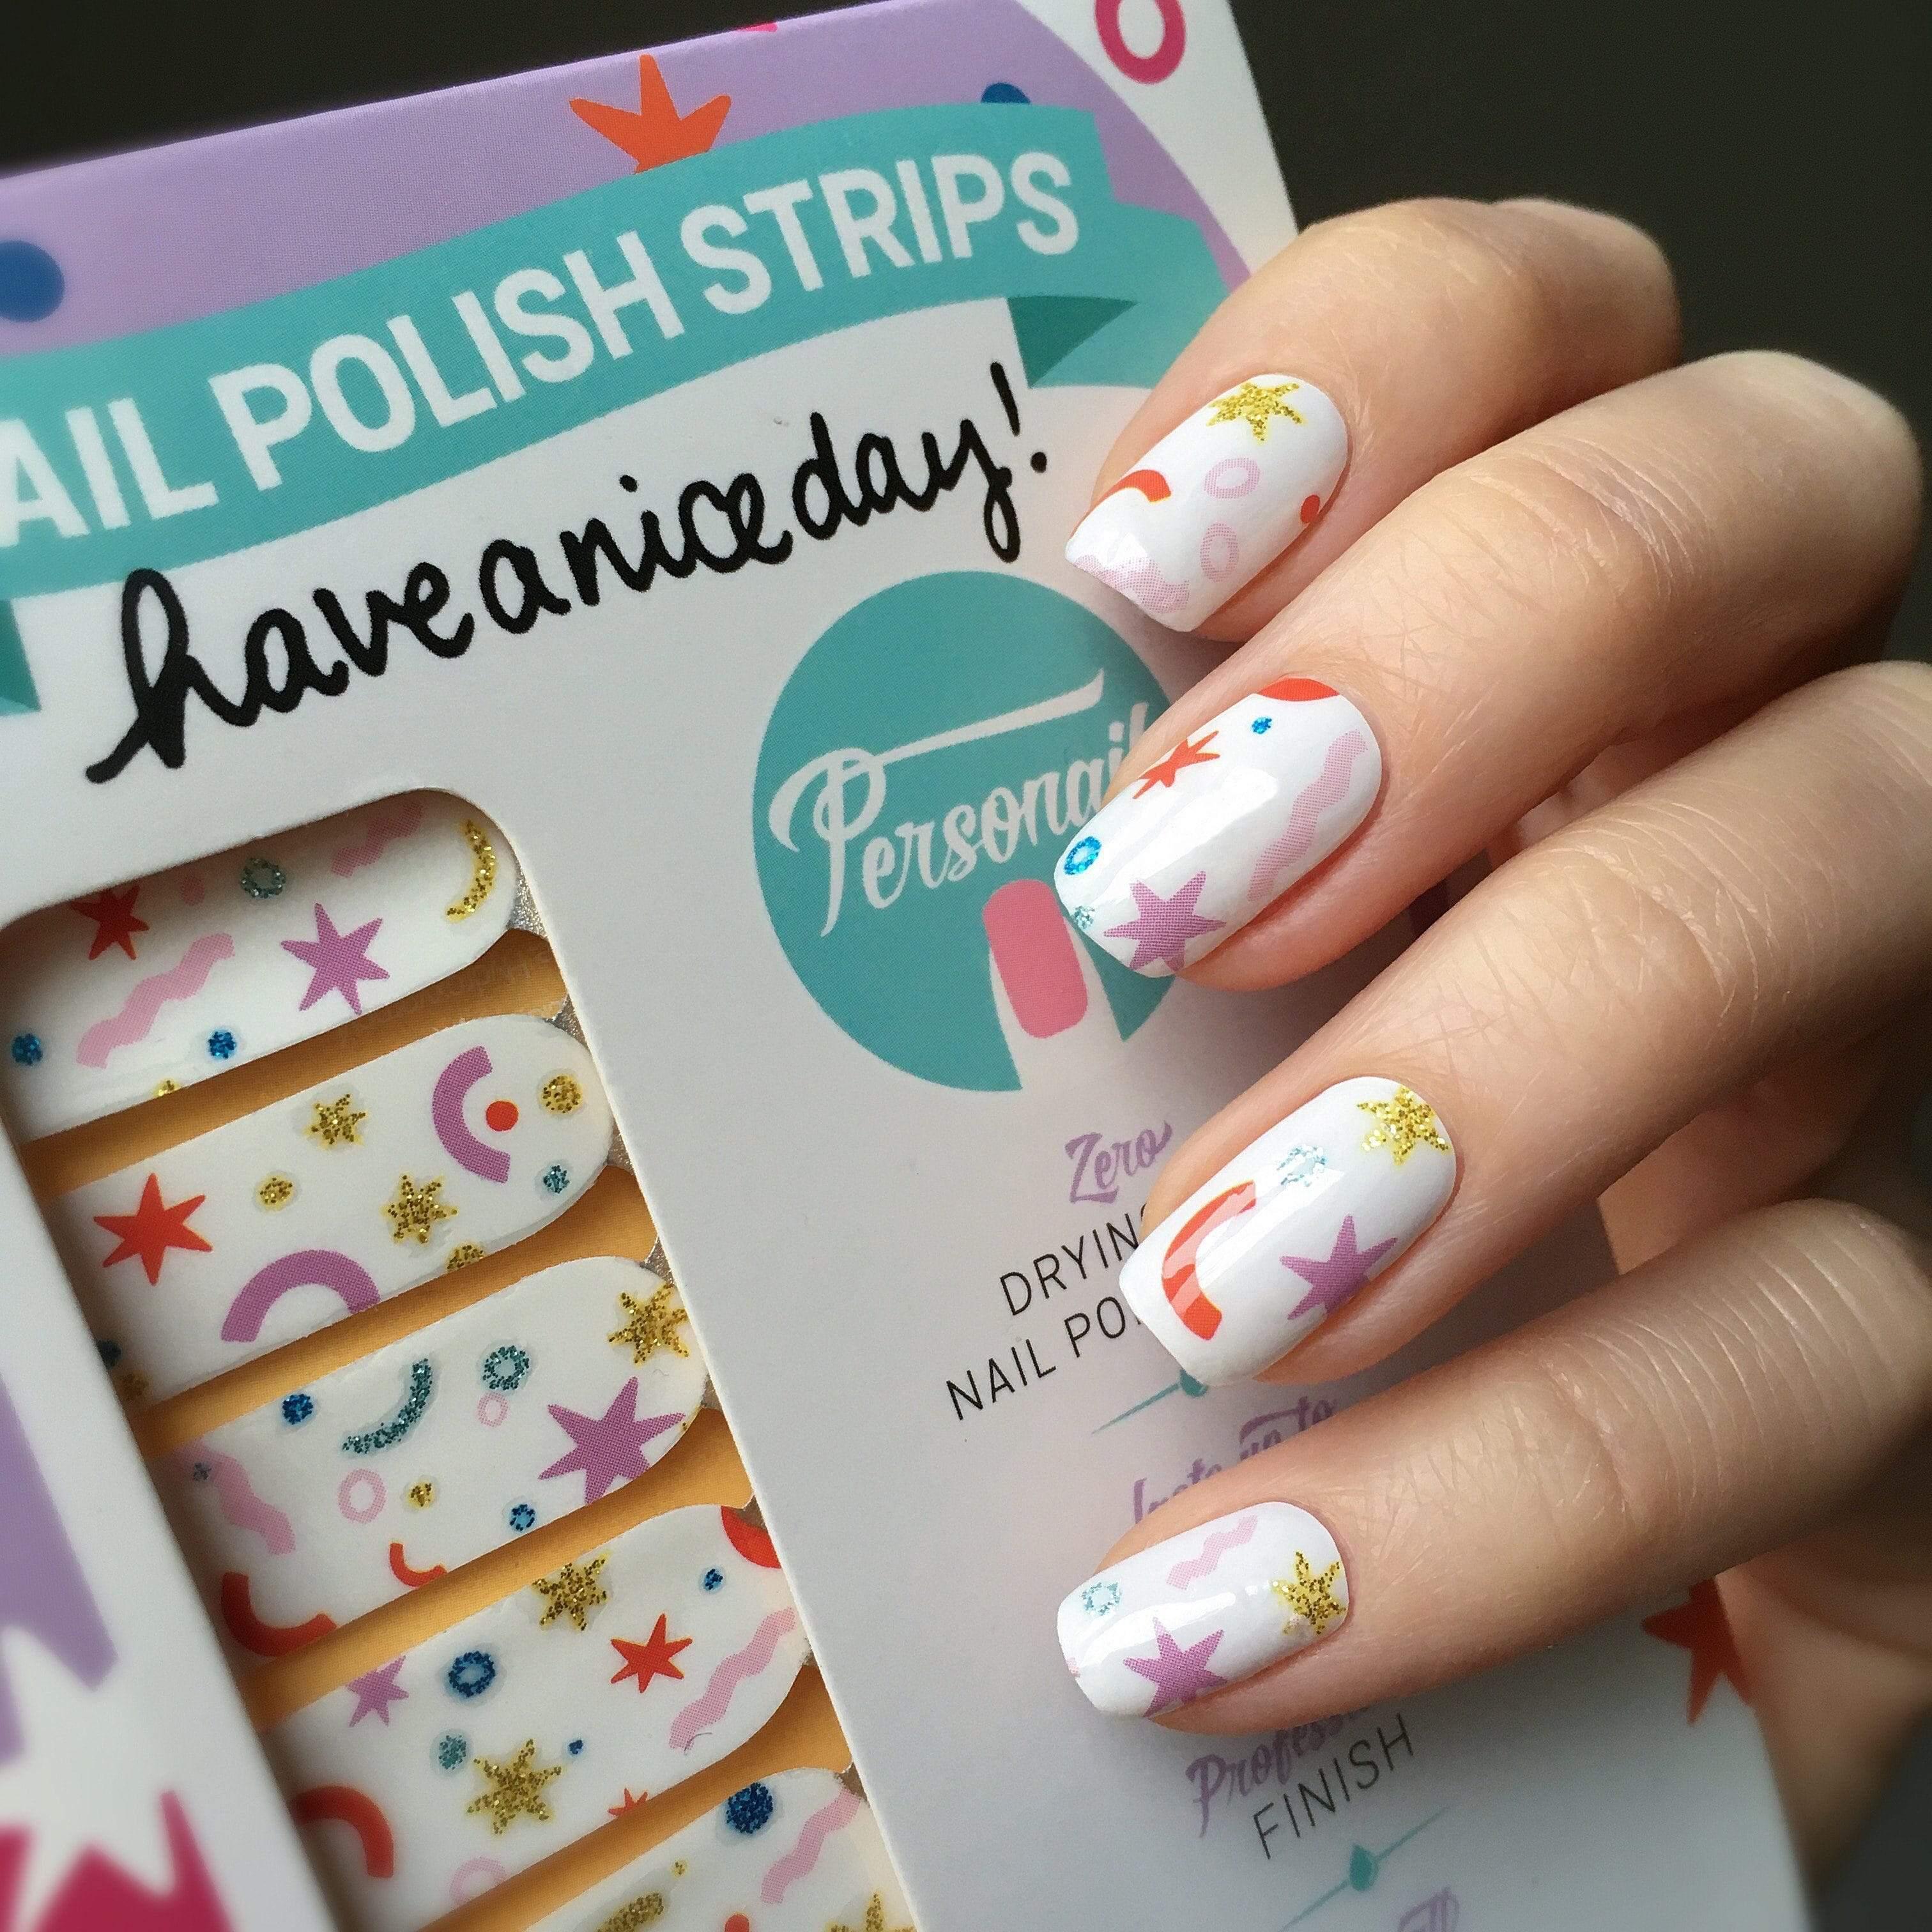 Personail Nail Wraps Confetti Queen by Have A Nice Day